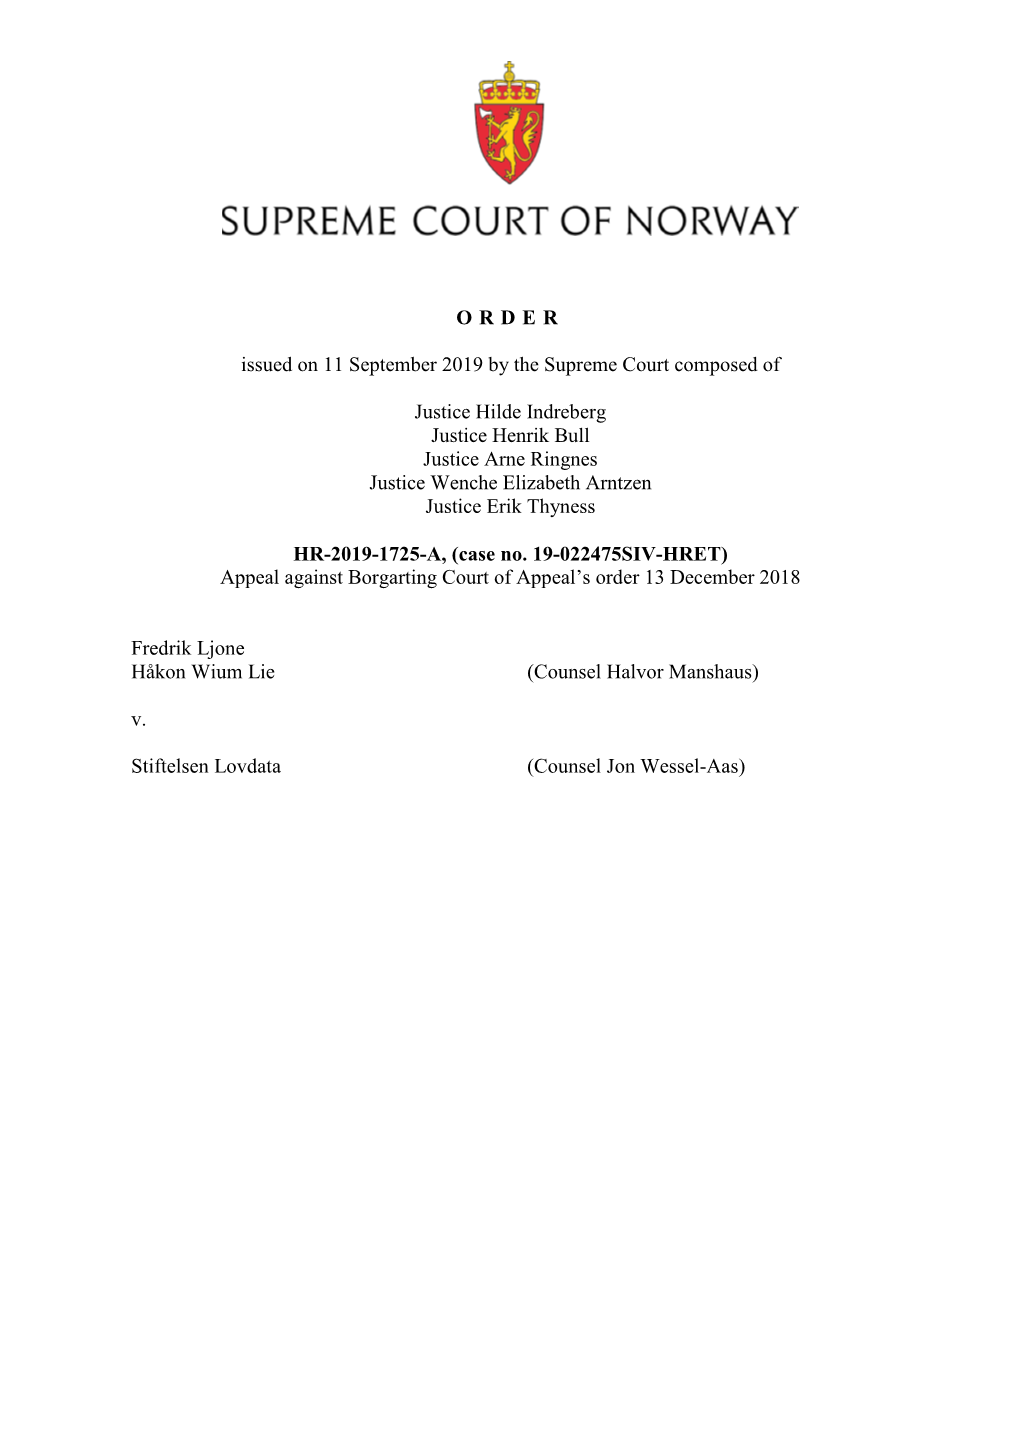 ORDER Issued on 11 September 2019 by the Supreme Court